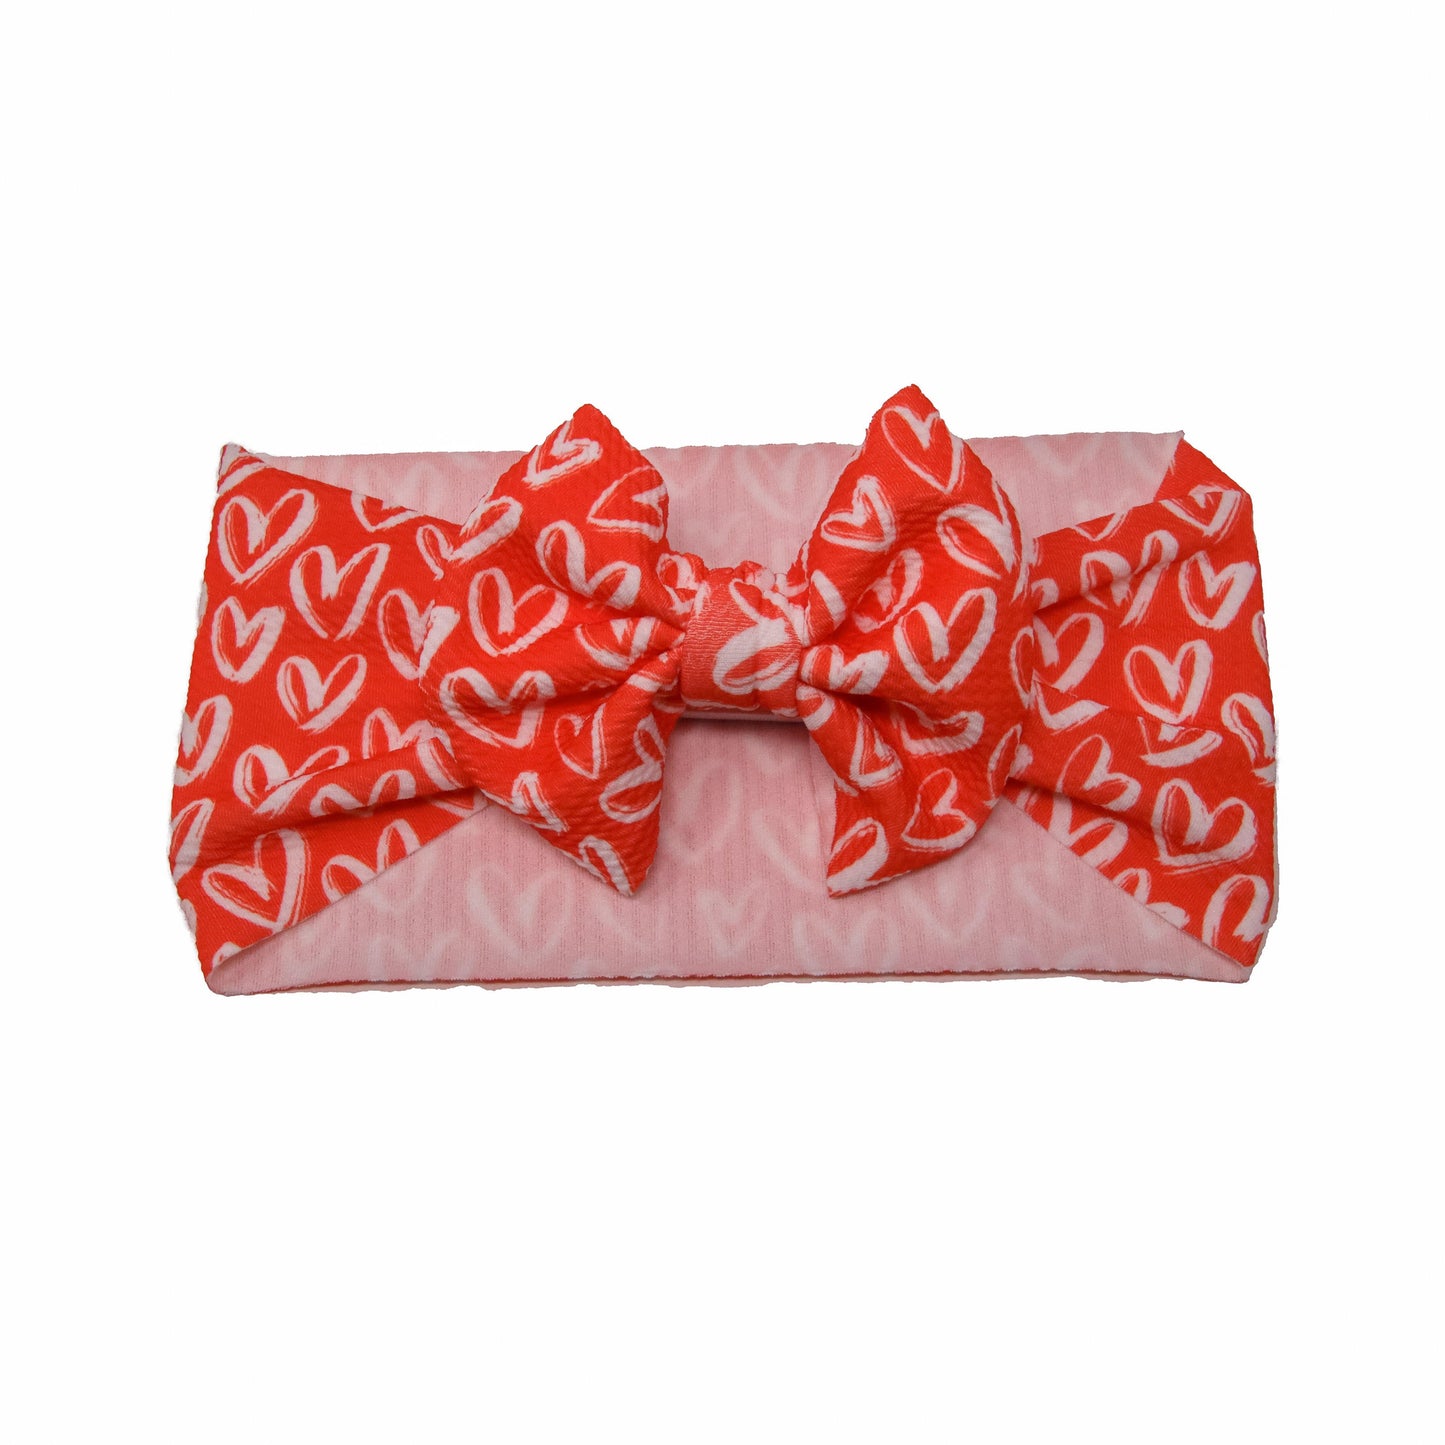 White Hearts on Red Fabric Bow Headwrap 5"